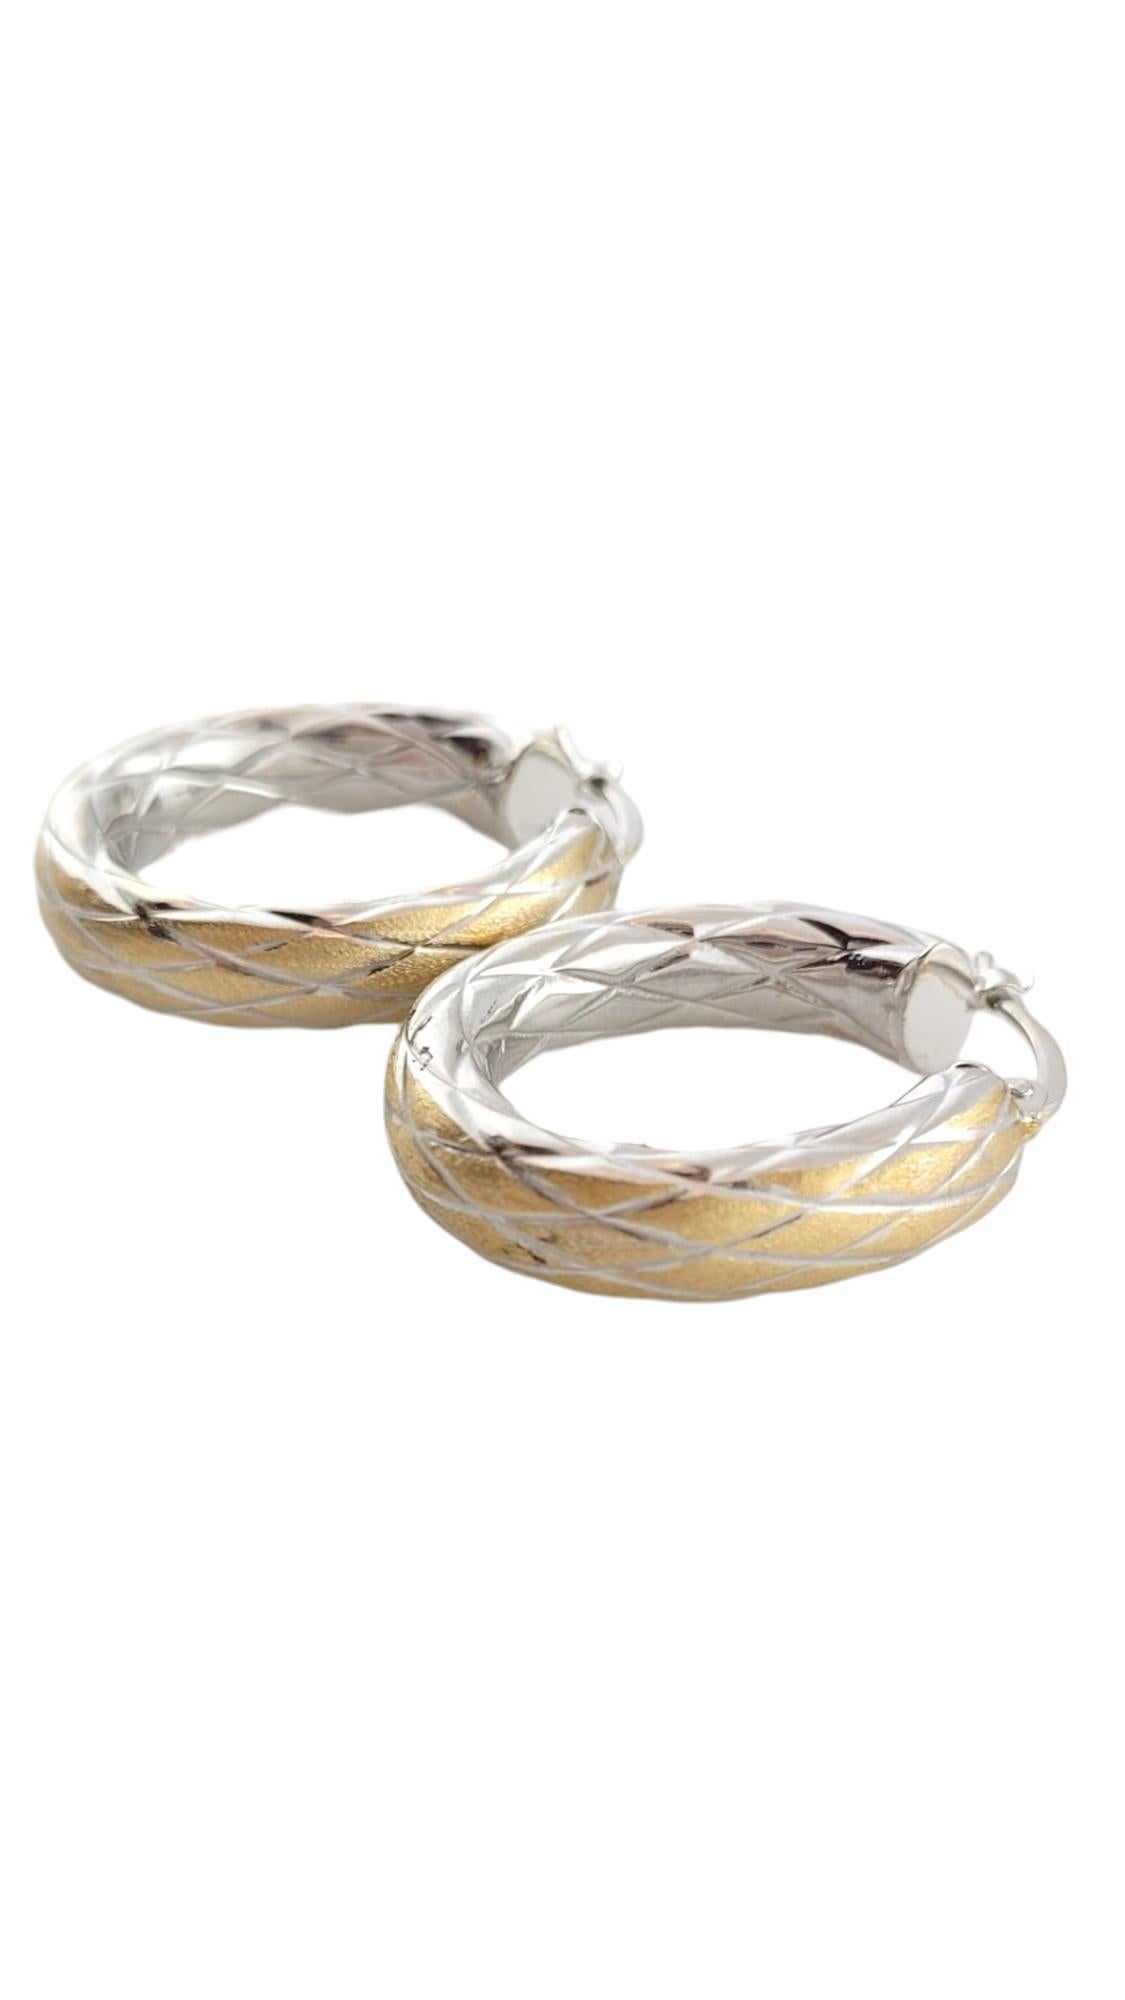 Vintage 14K White and Yellow Gold Criss Cross Pattern Hoops

Tis gorgeous set of 14K white gold hoops have yellow gold detailing and a beautiful crisscross X pattern!

Size: 29.98mm X 24.77mm X 6.18mm

Weight: 3.4 dwt/ 5.3 g

Hallmark: 14KT